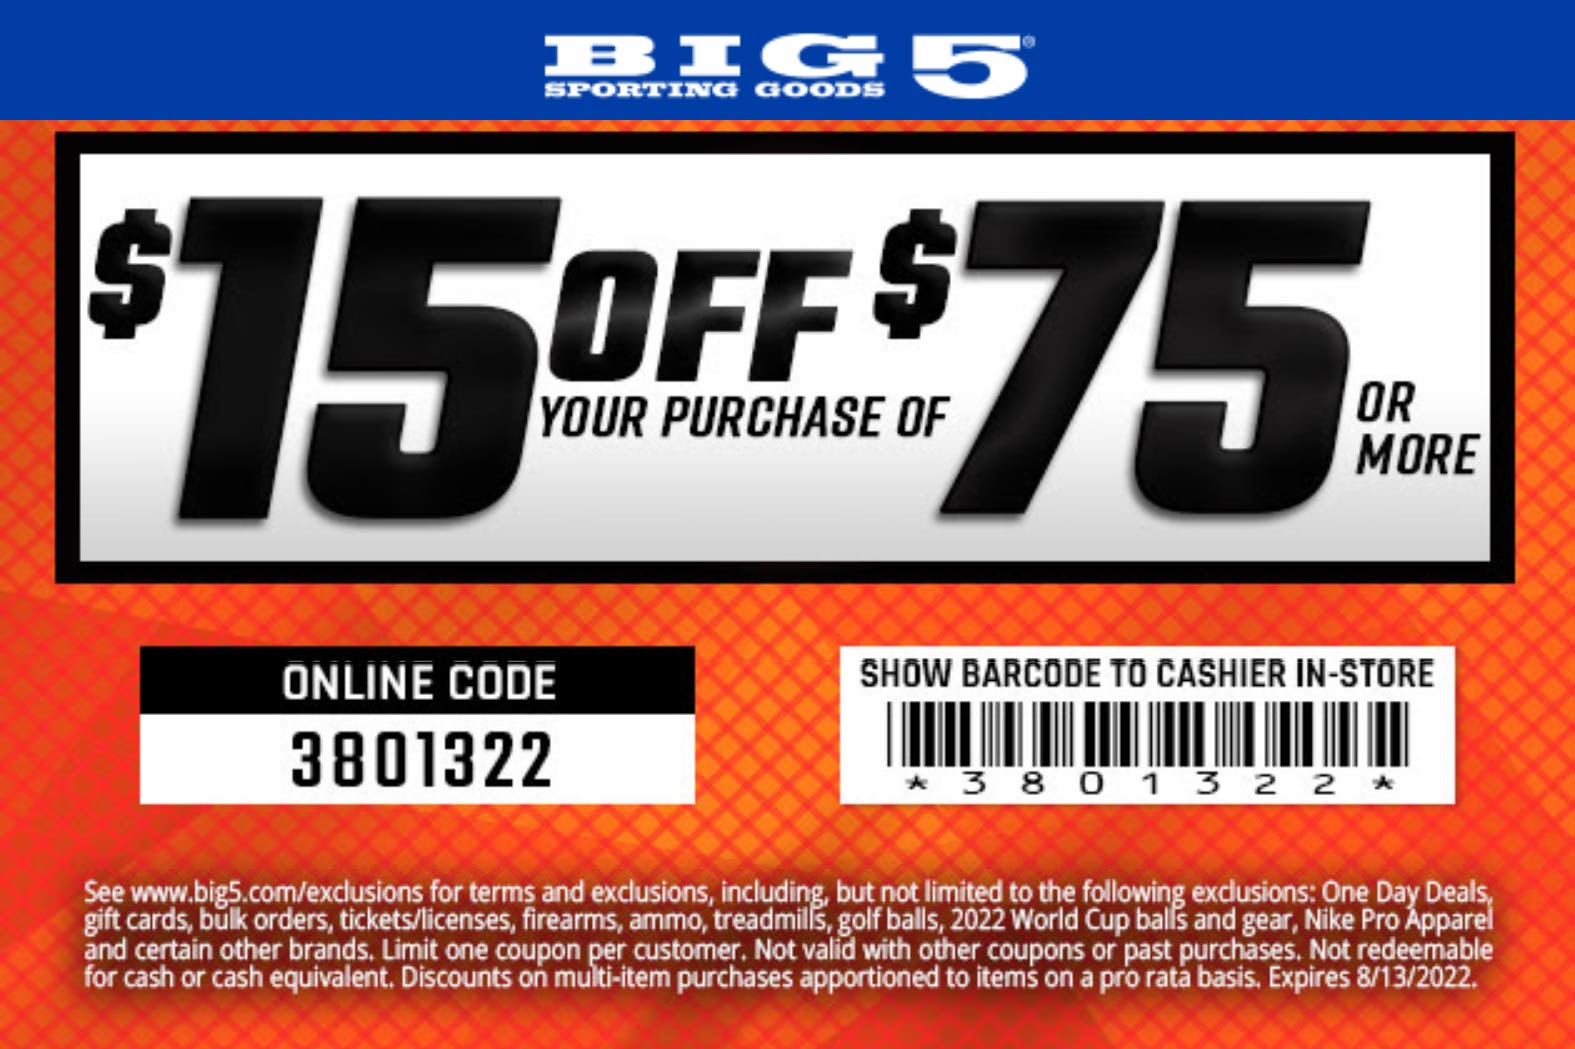 Big 5 stores Coupon  $15 off $75 today at Big 5 sporting goods, or online via promo code 3801322 #big5 